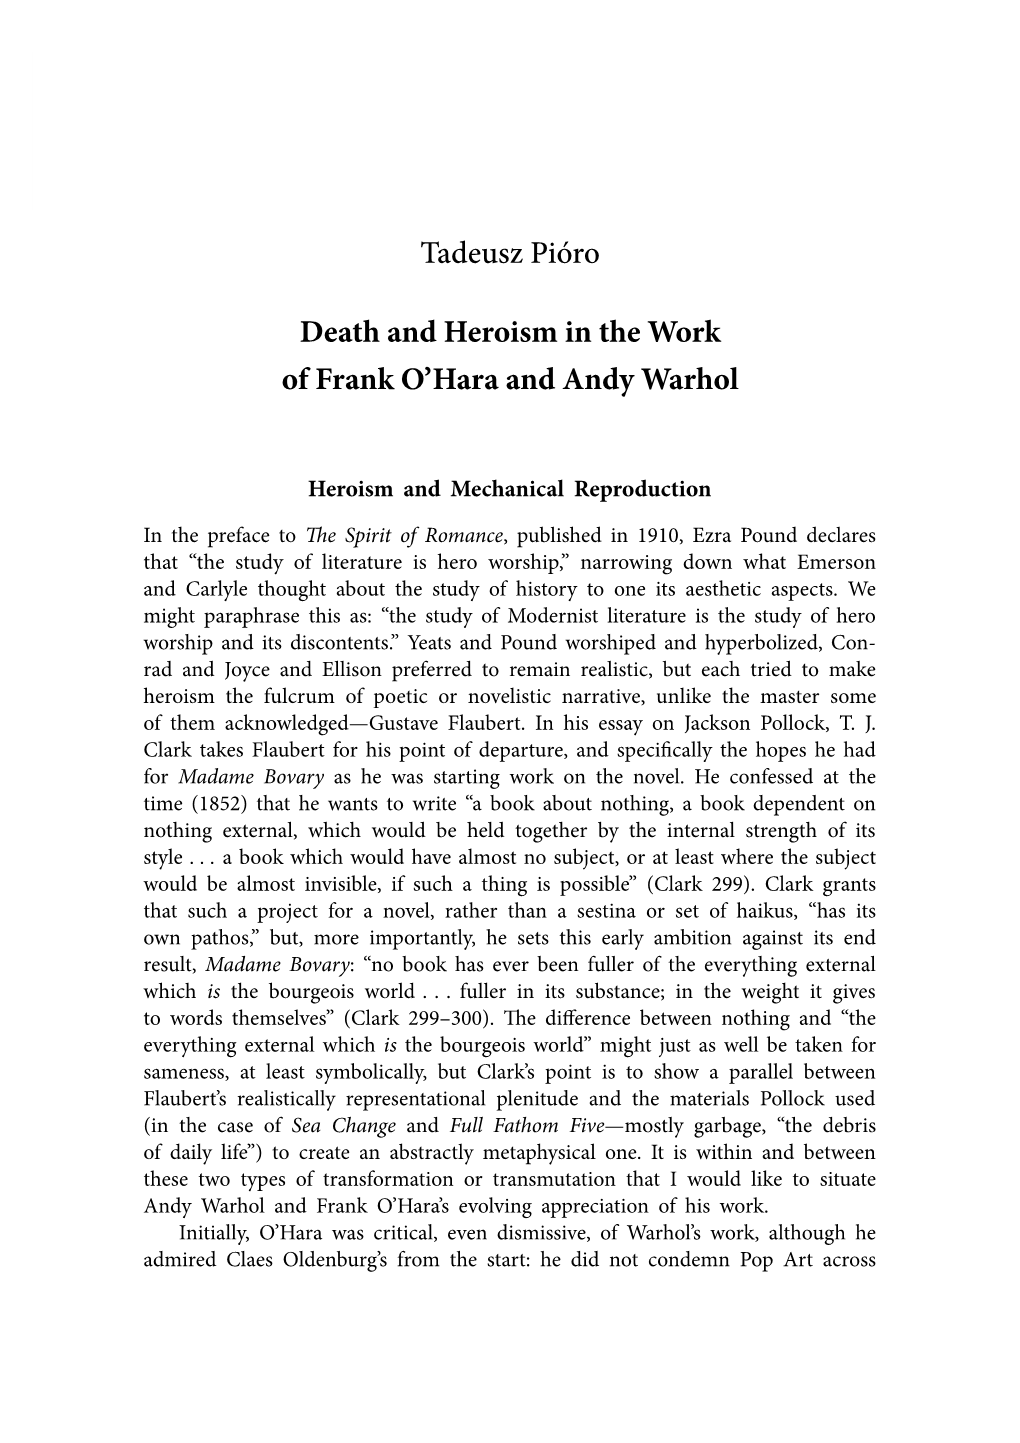 Tadeusz Pióro Death and Heroism in the Work of Frank O'hara and Andy